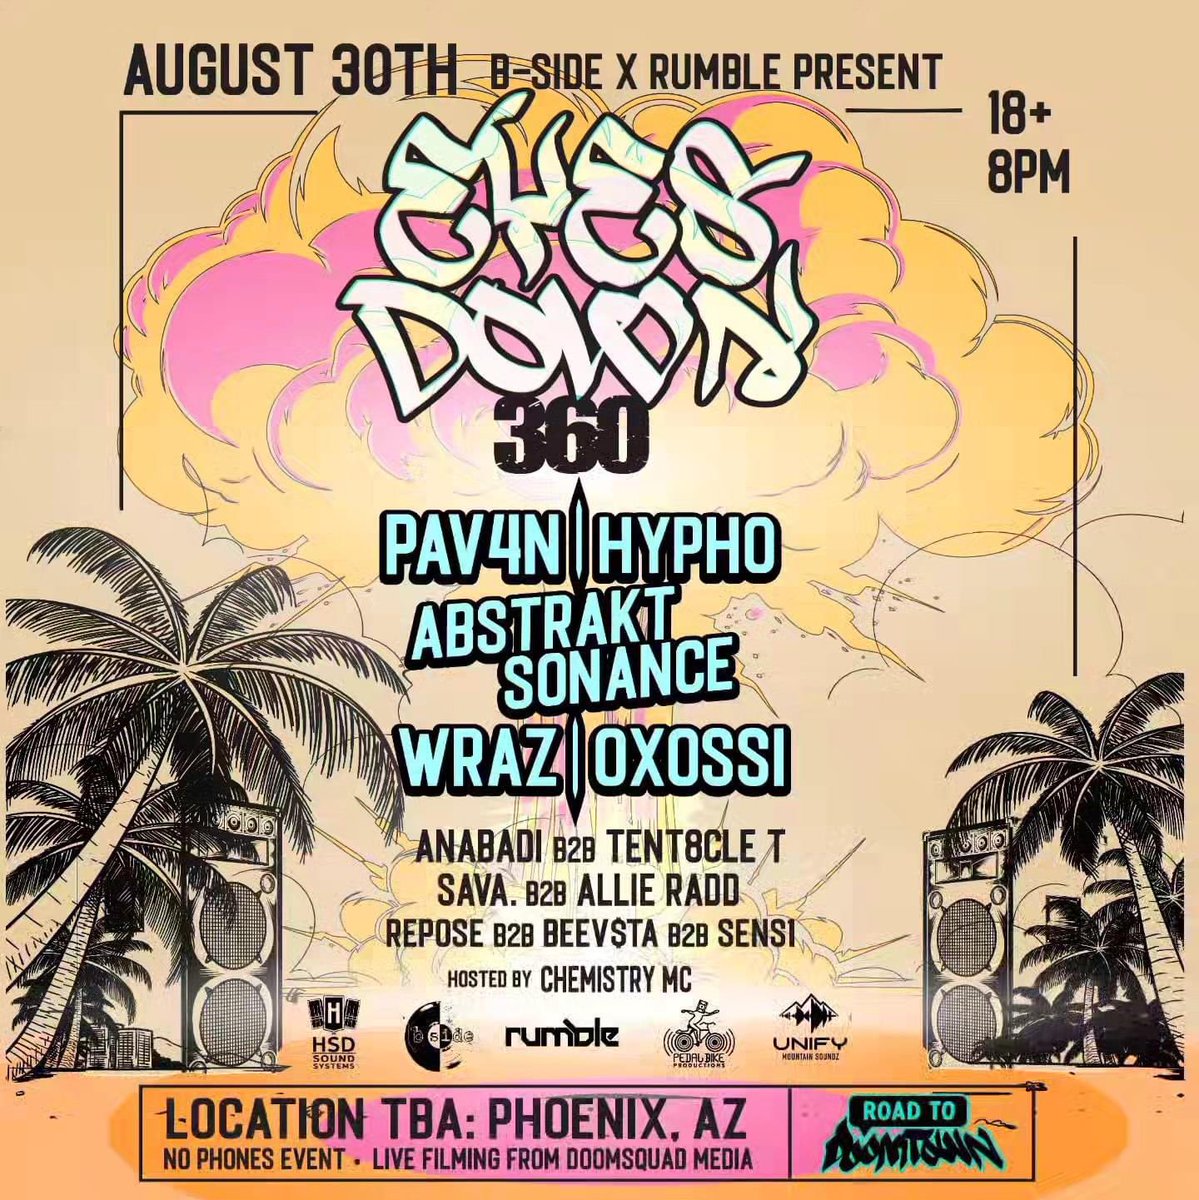 Yo yo!!! @Bsidelosangeles is going to Phoenix, Arizona! B-Side and Rumble are coming together in Phoenix to bring the renowned B-Side underground event known as Eyes Down! This will be held in 360 fashion with a 4 point HSD System! 🔊🔊🔊🔊 The Eyes Down 360 event will be